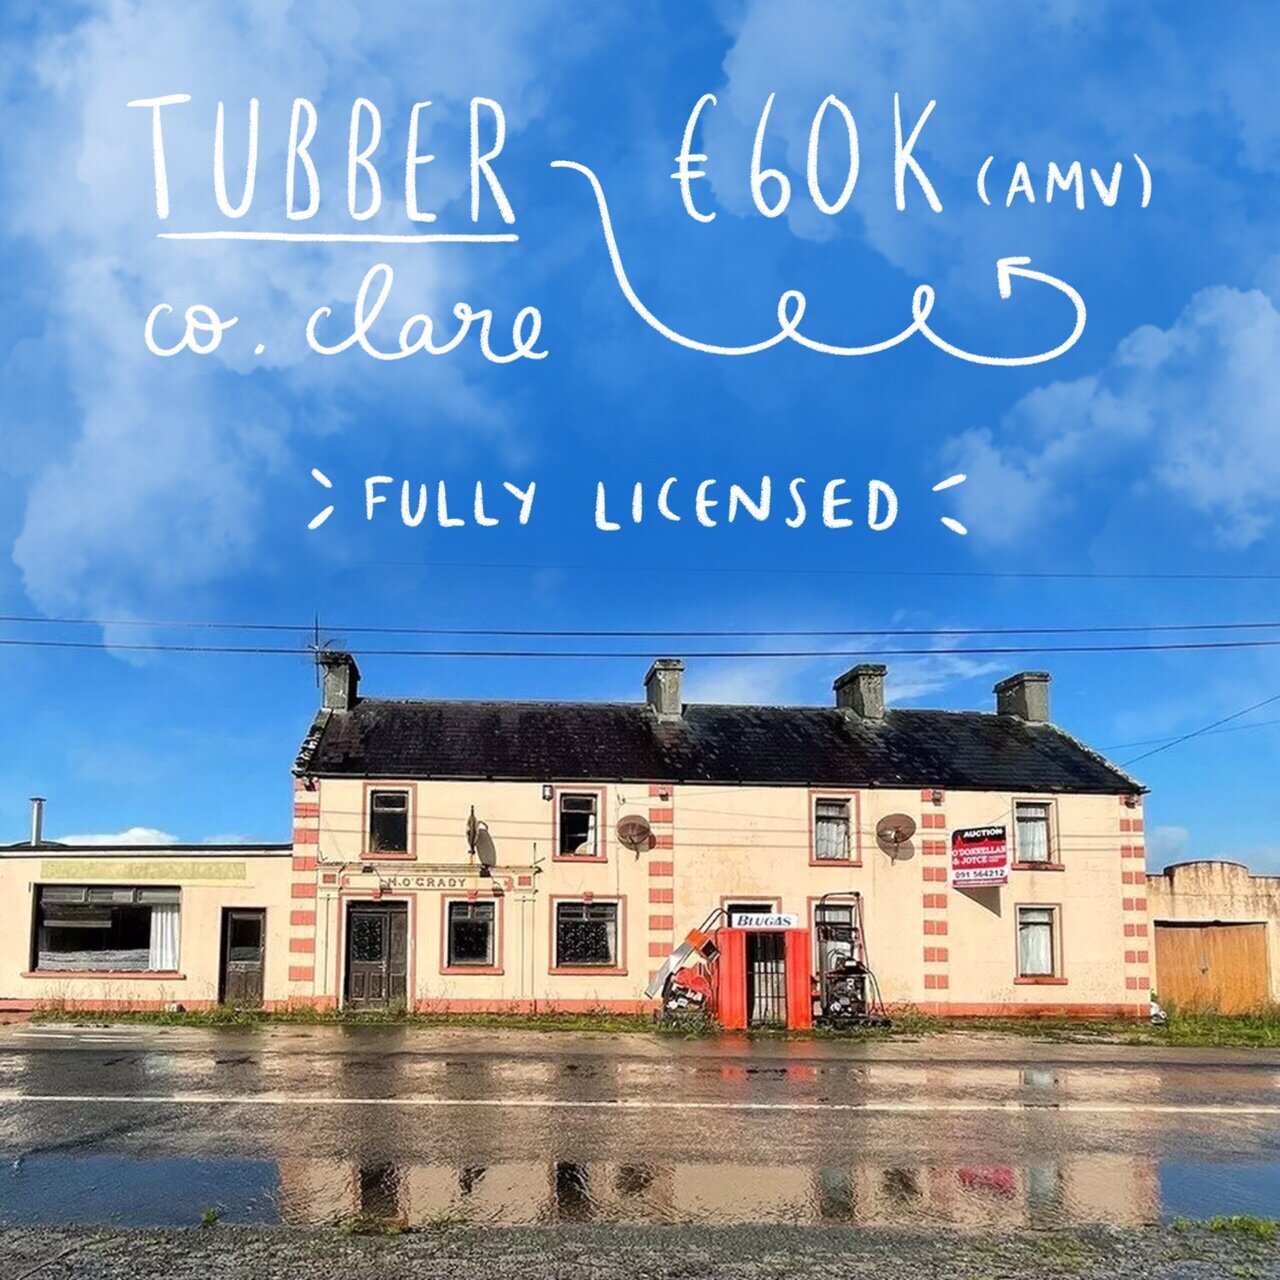 Tubber, Co. Clare. €60k AMV